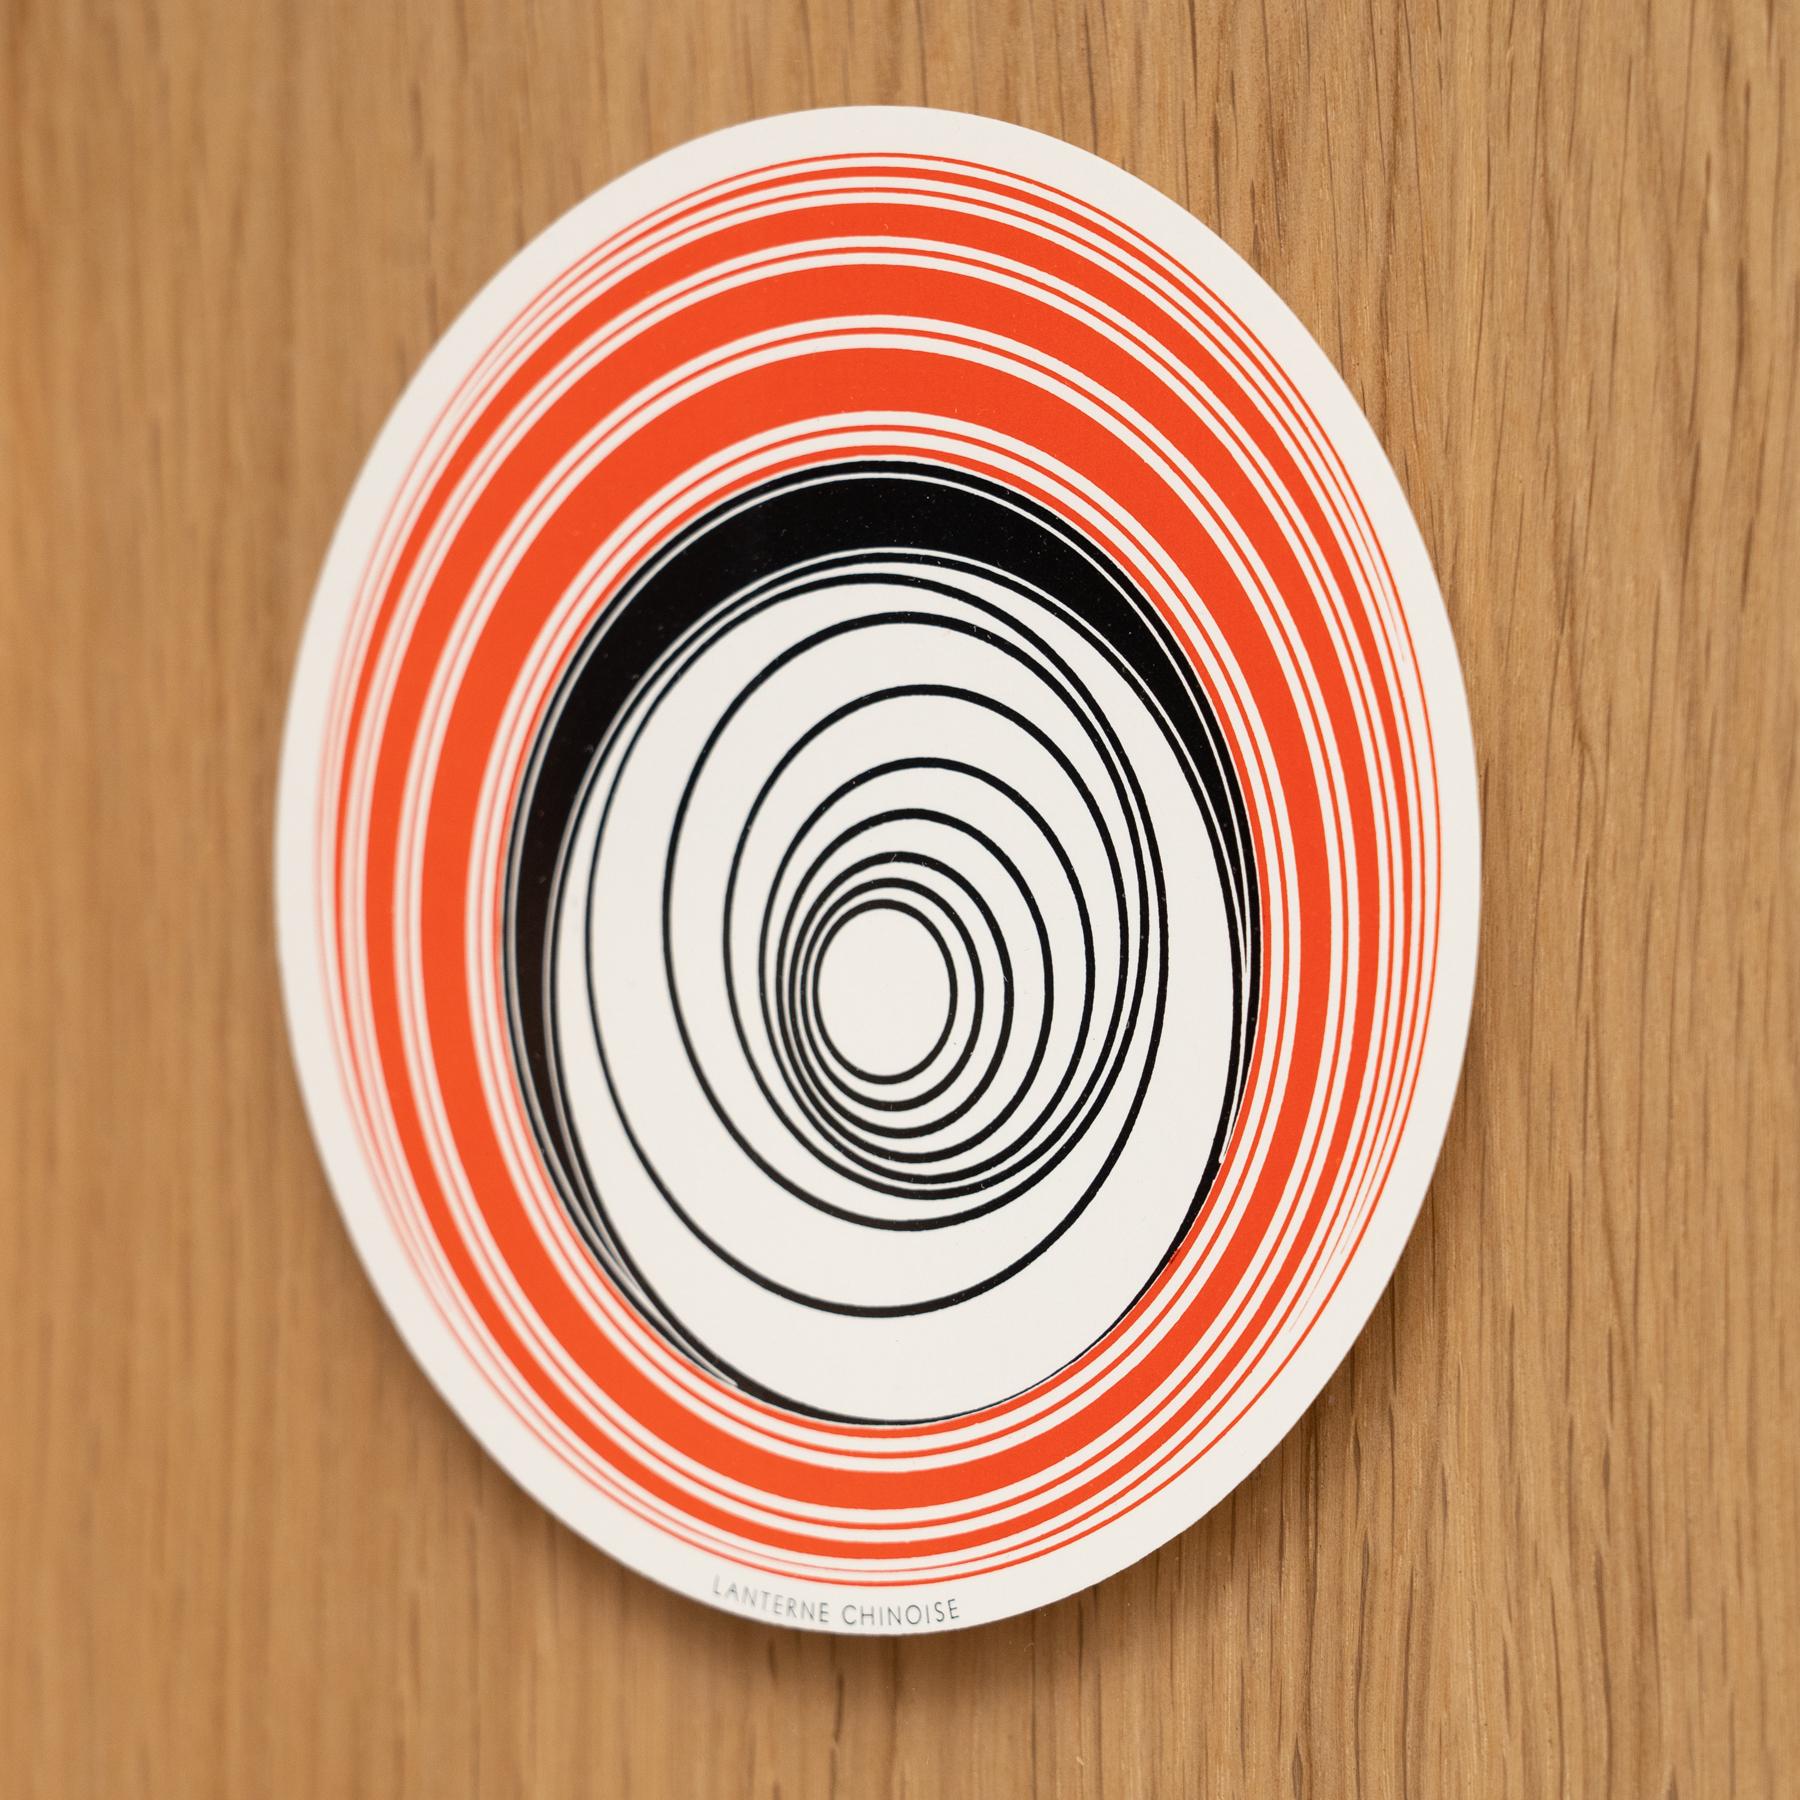 Paper Marcel Duchamp Lanterne Chinoise Rotorelief by Konig Series 133, 1987 For Sale